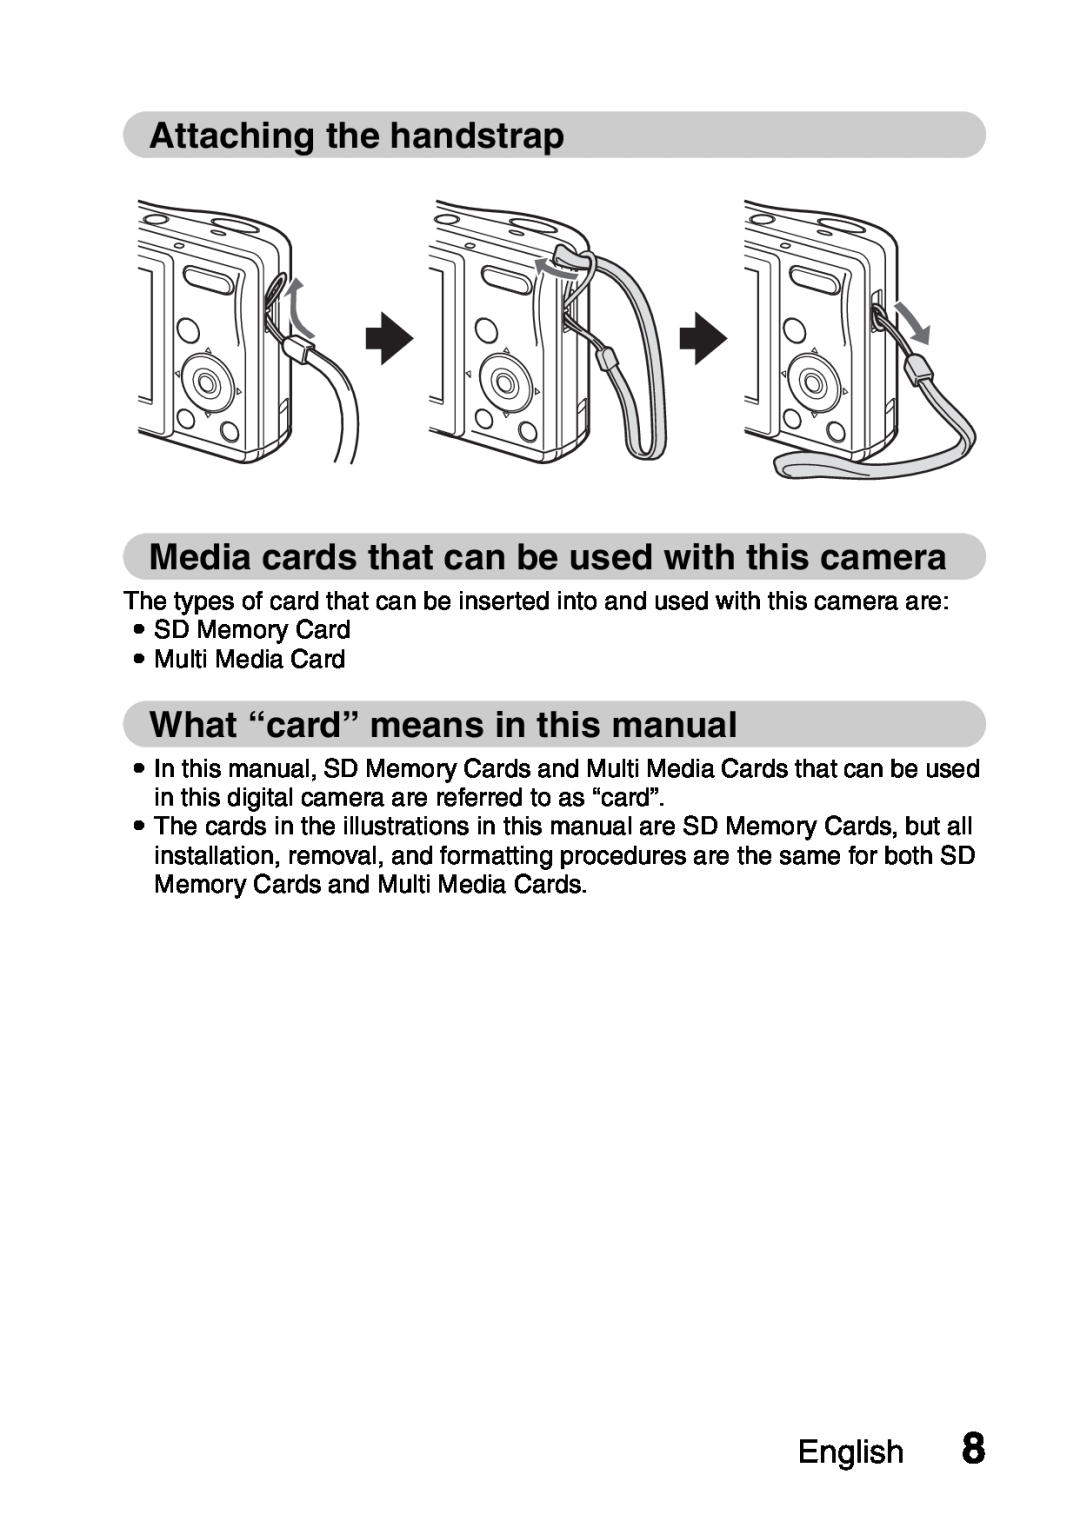 Sanyo VPC-S60 Attaching the handstrap Media cards that can be used with this camera, What “card” means in this manual 